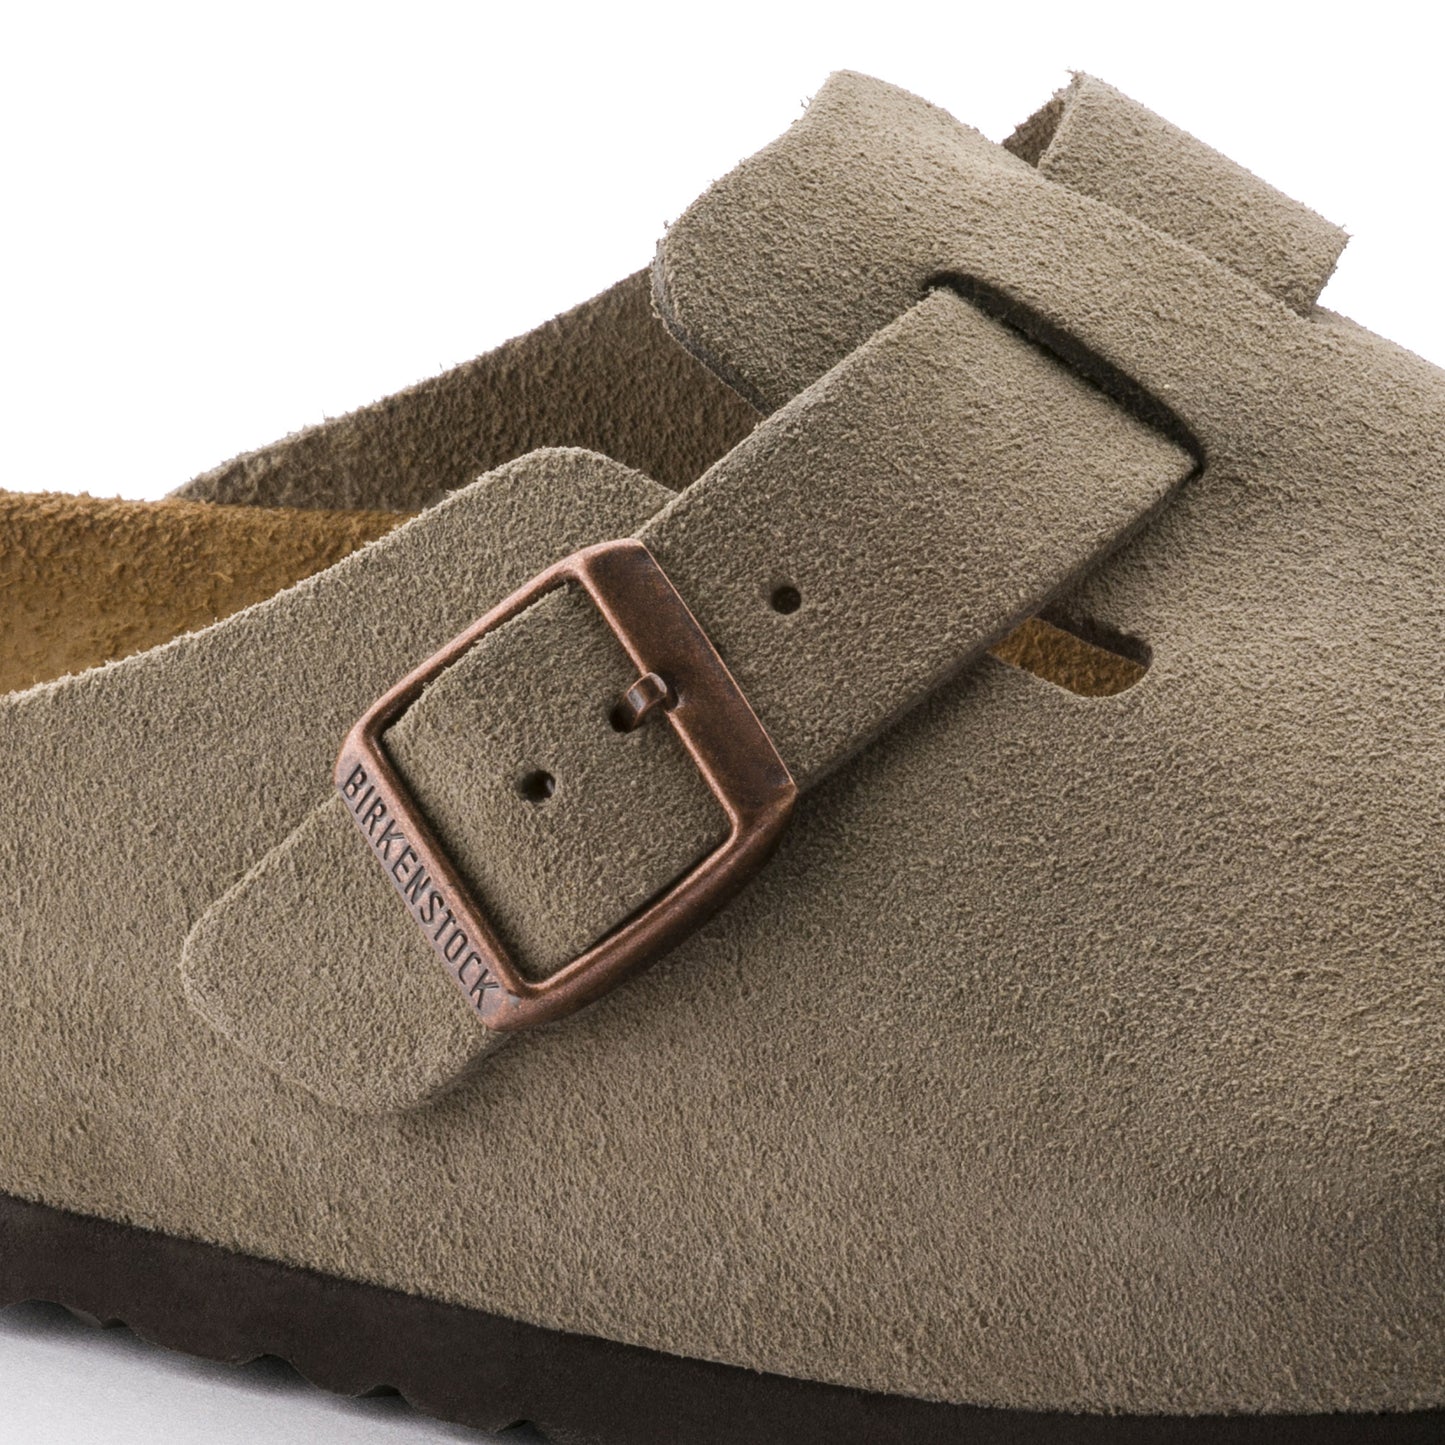 Birkenstock Unisex Boston Soft Footbed Suede Leather - Taupe